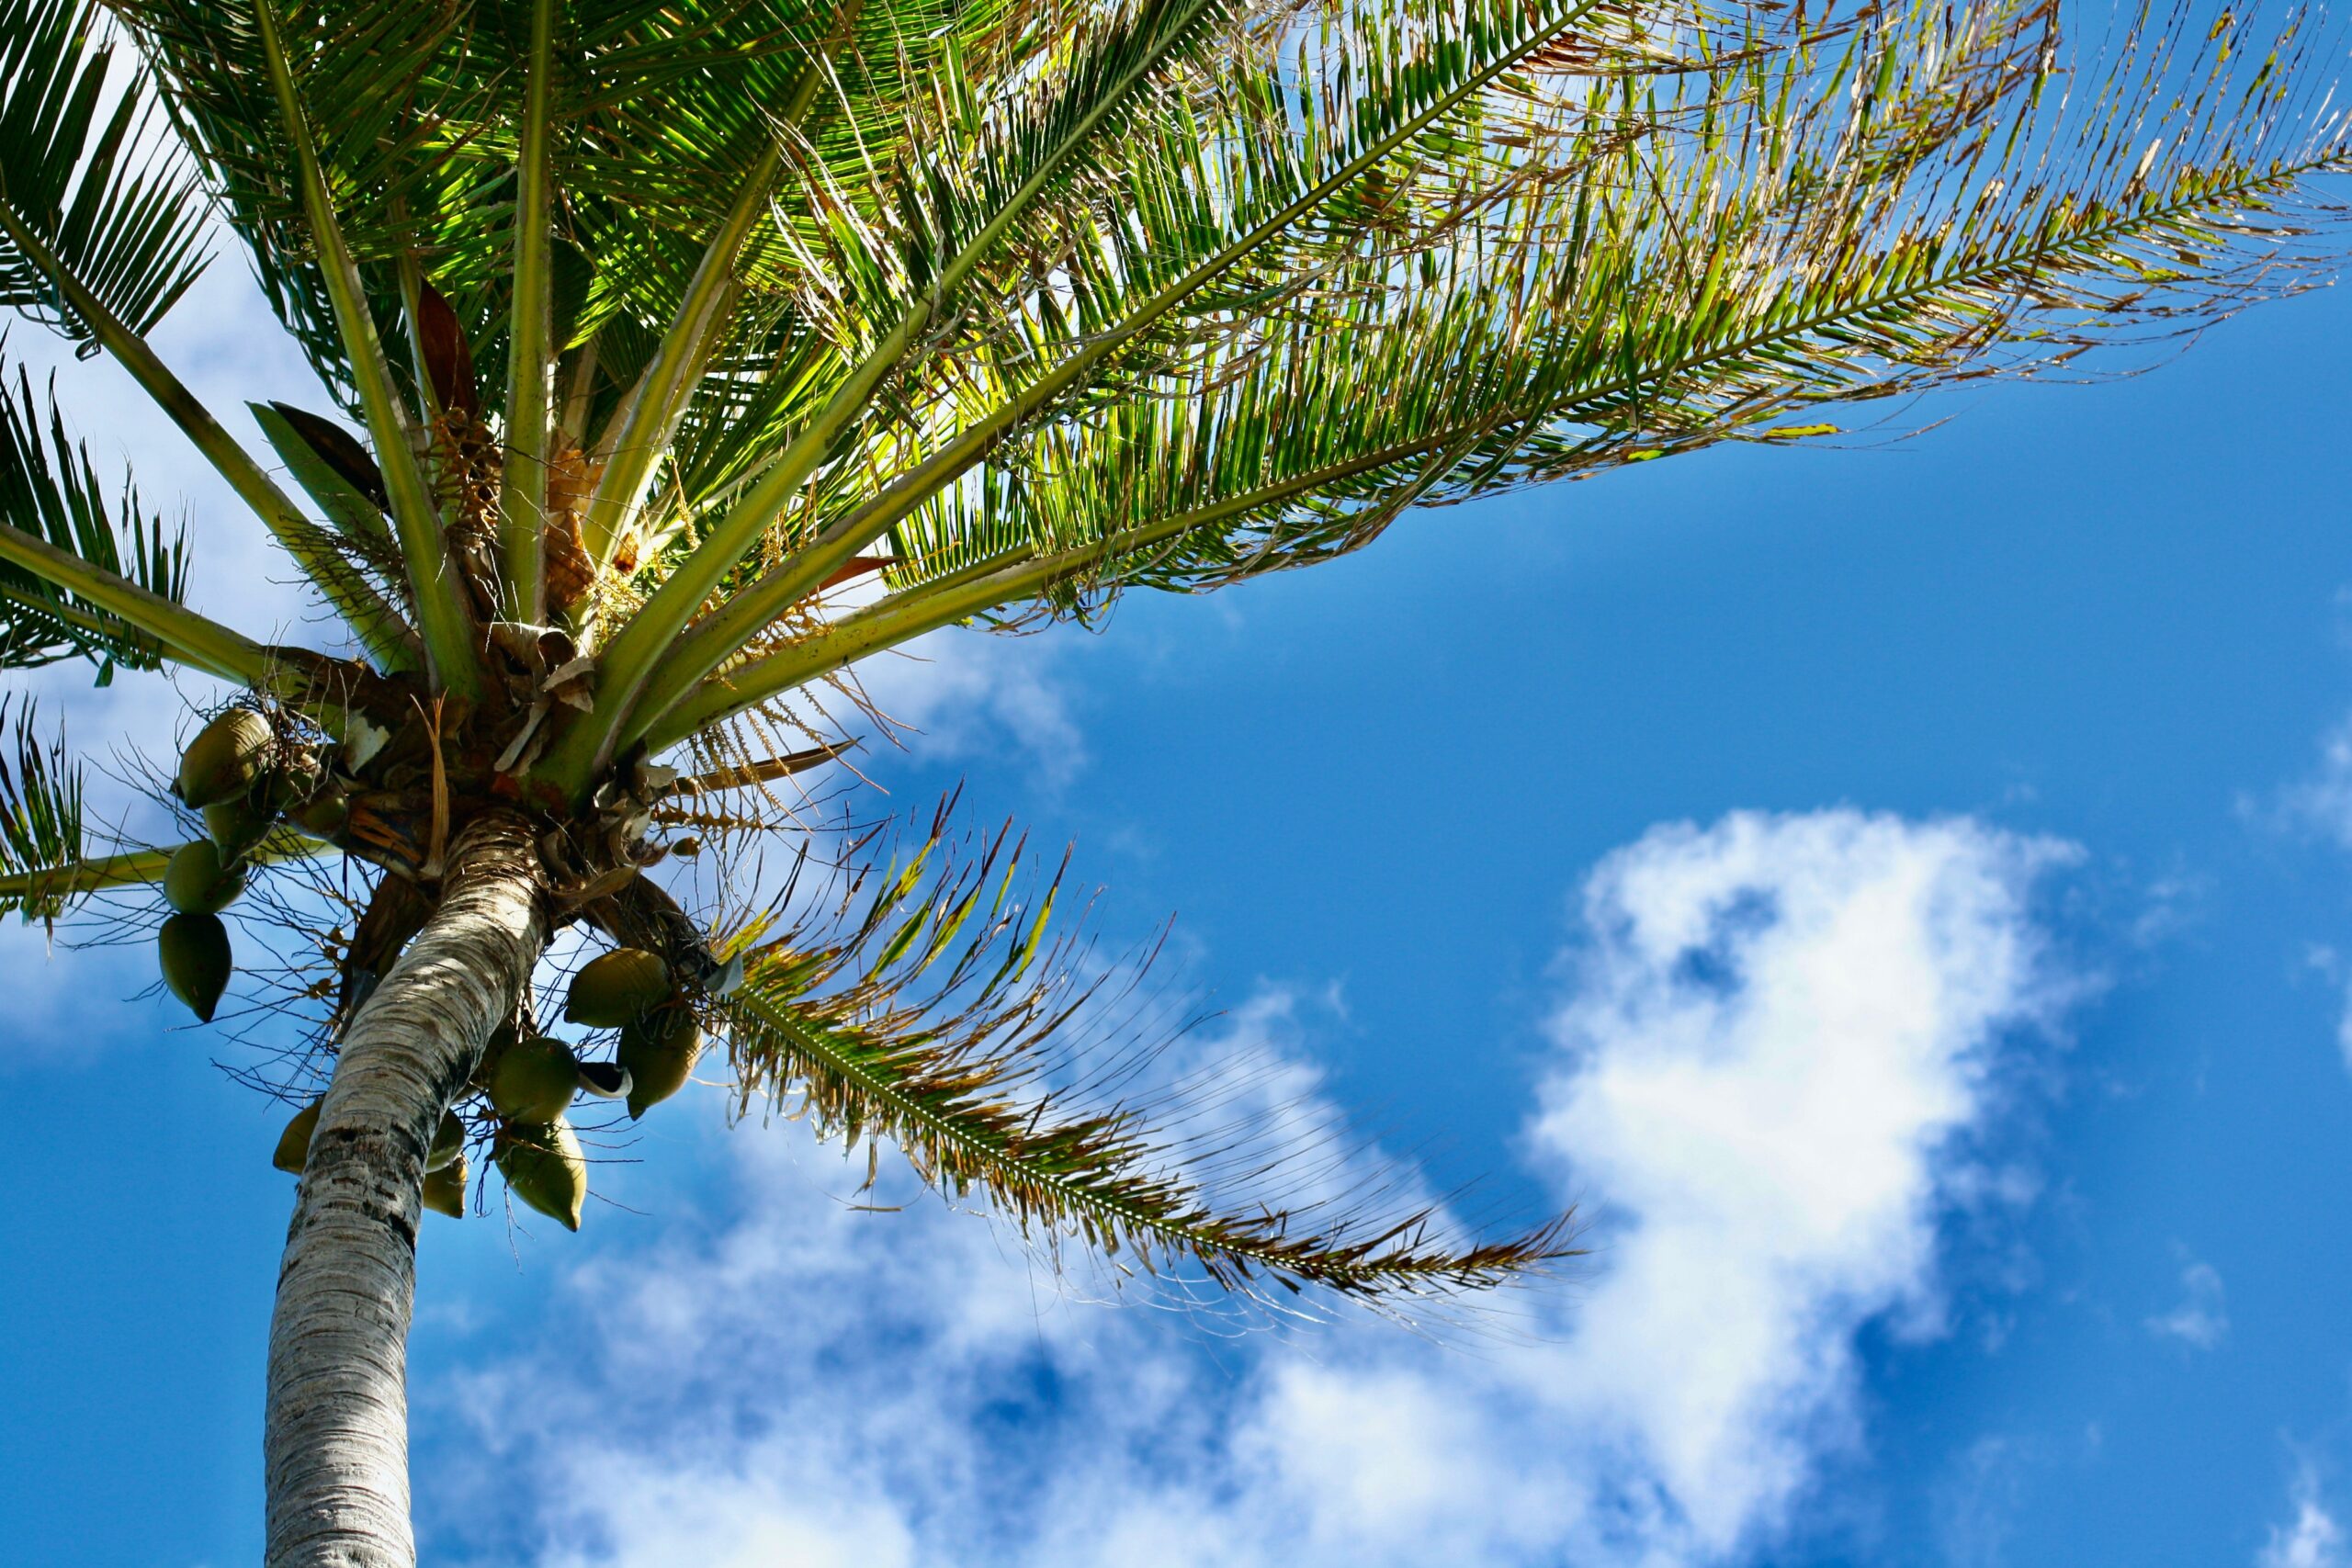 Magic Sands Beach Park is a popular destination in Hawaii. Check out the cool features of the tropical location.
Pictured: a palm tree in Hawaii on a cloudy and sunny day 